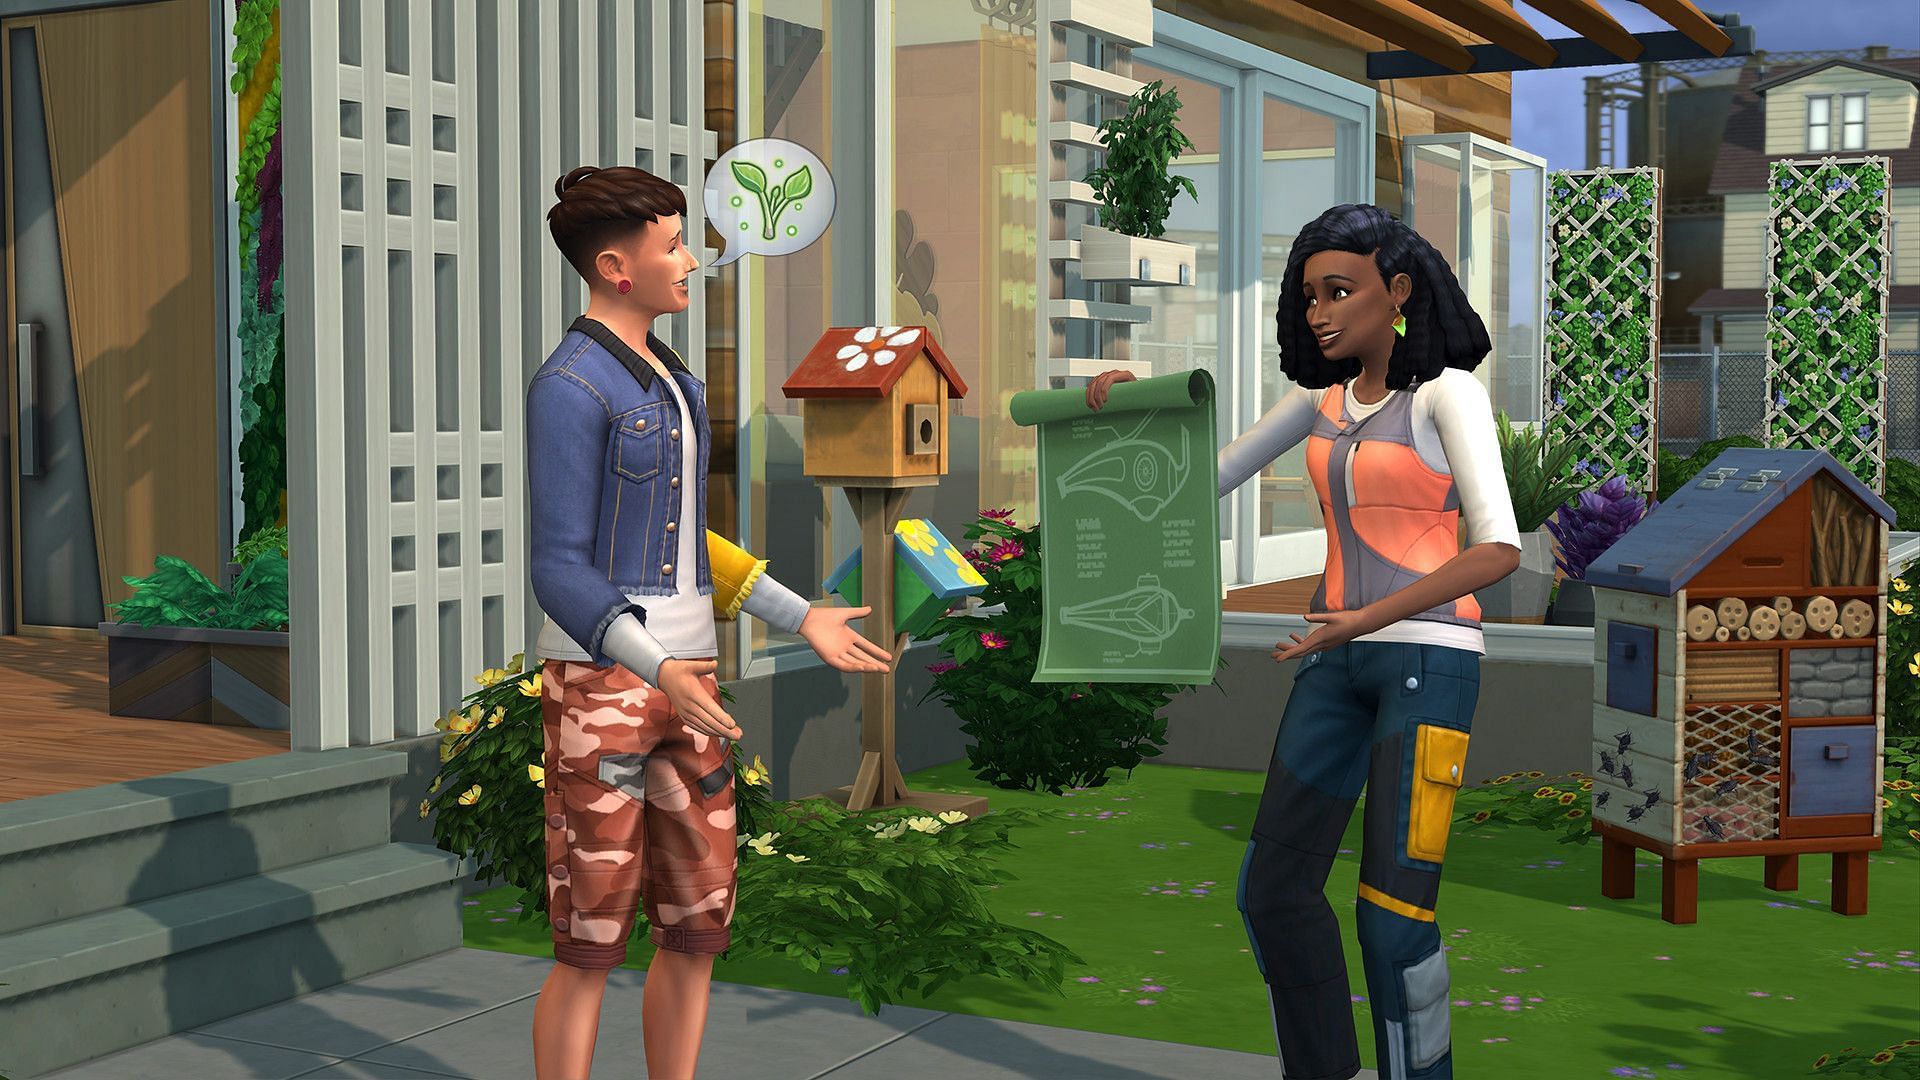 Eco Lifestyle is an enjoyable DLC in Sims 4 (Image via Steam)